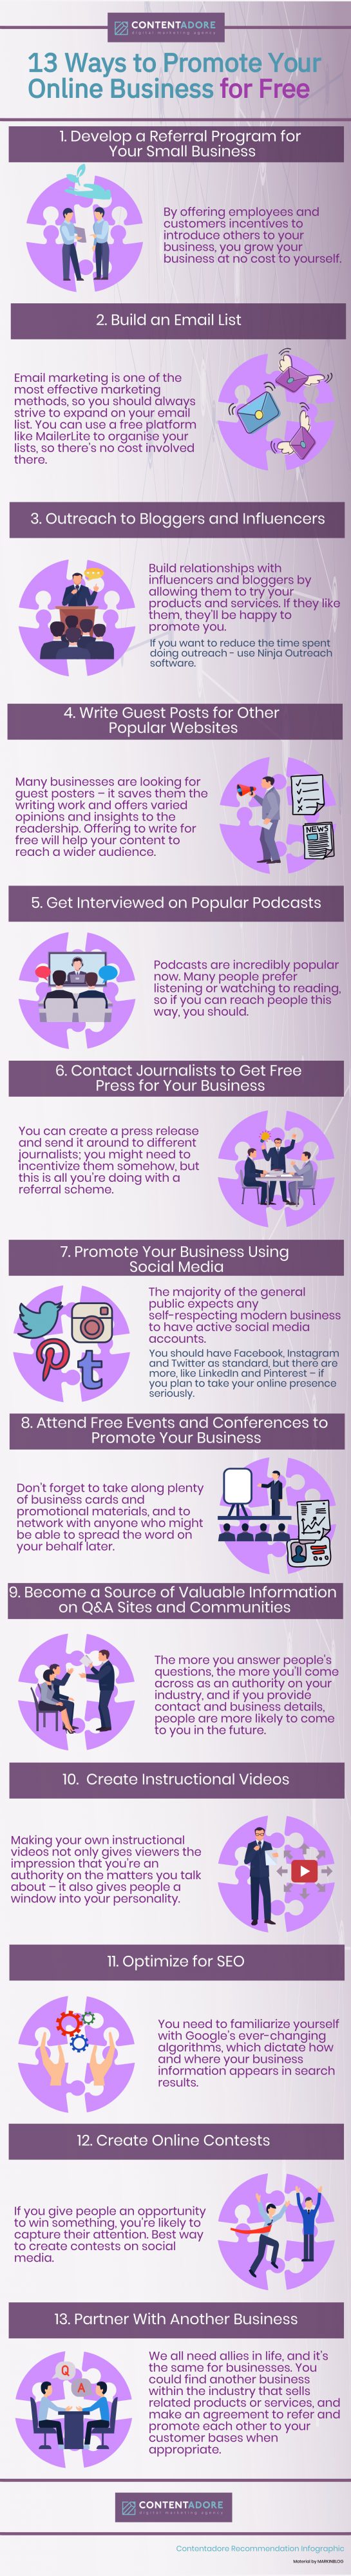 13 ways to promote business for free